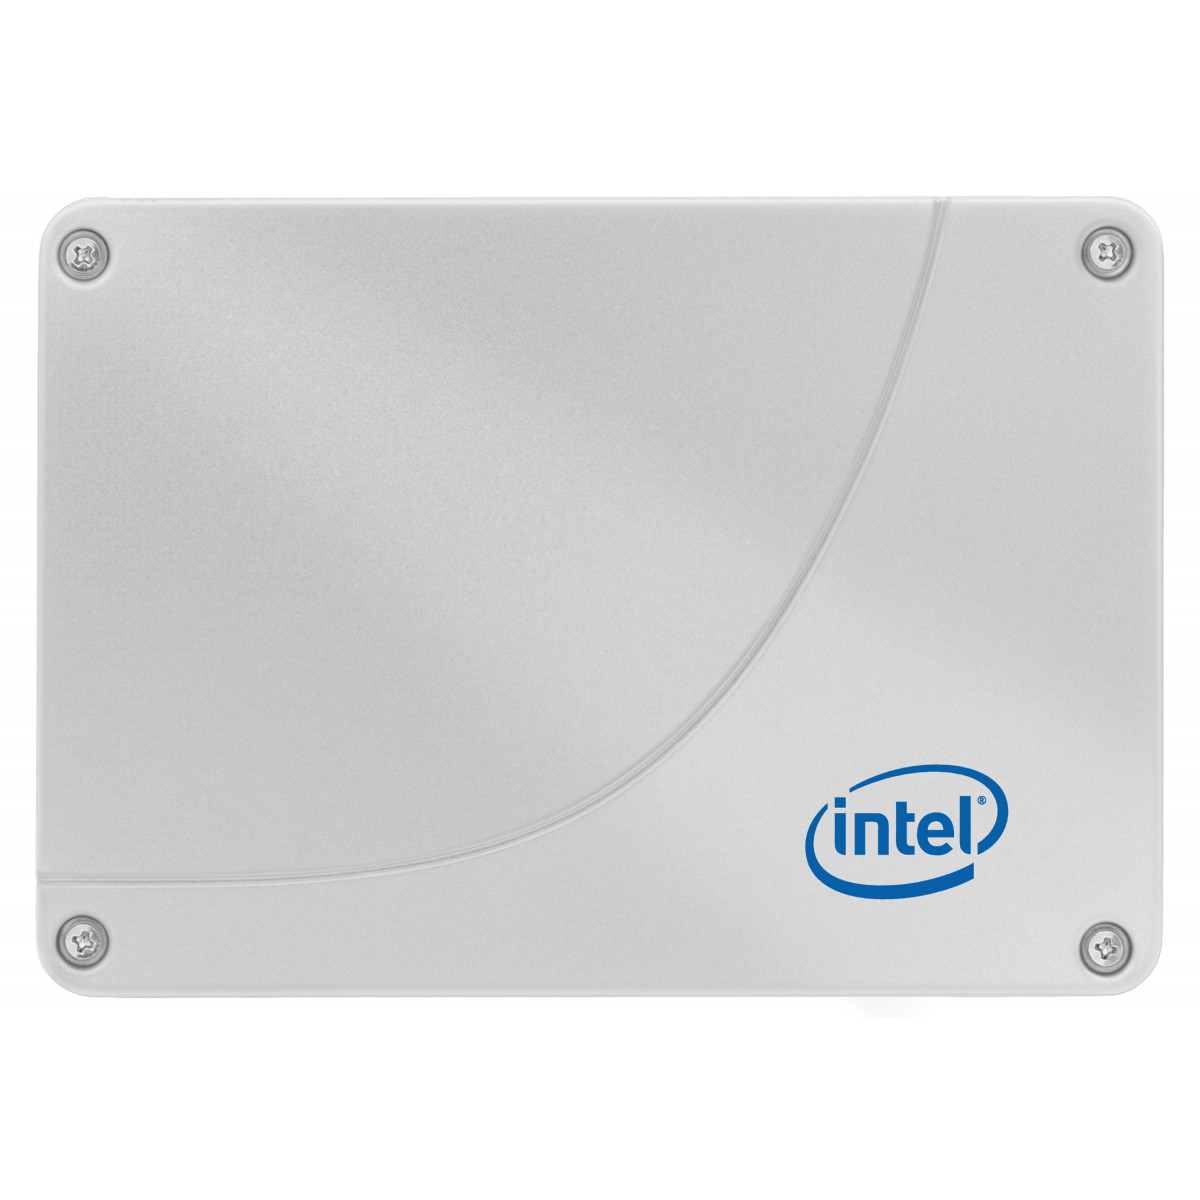 Intel SSD D3 S4520 SERIES 7.6TB 2.5IN SATA 3D4 - Solid State Disk - Serial ATA